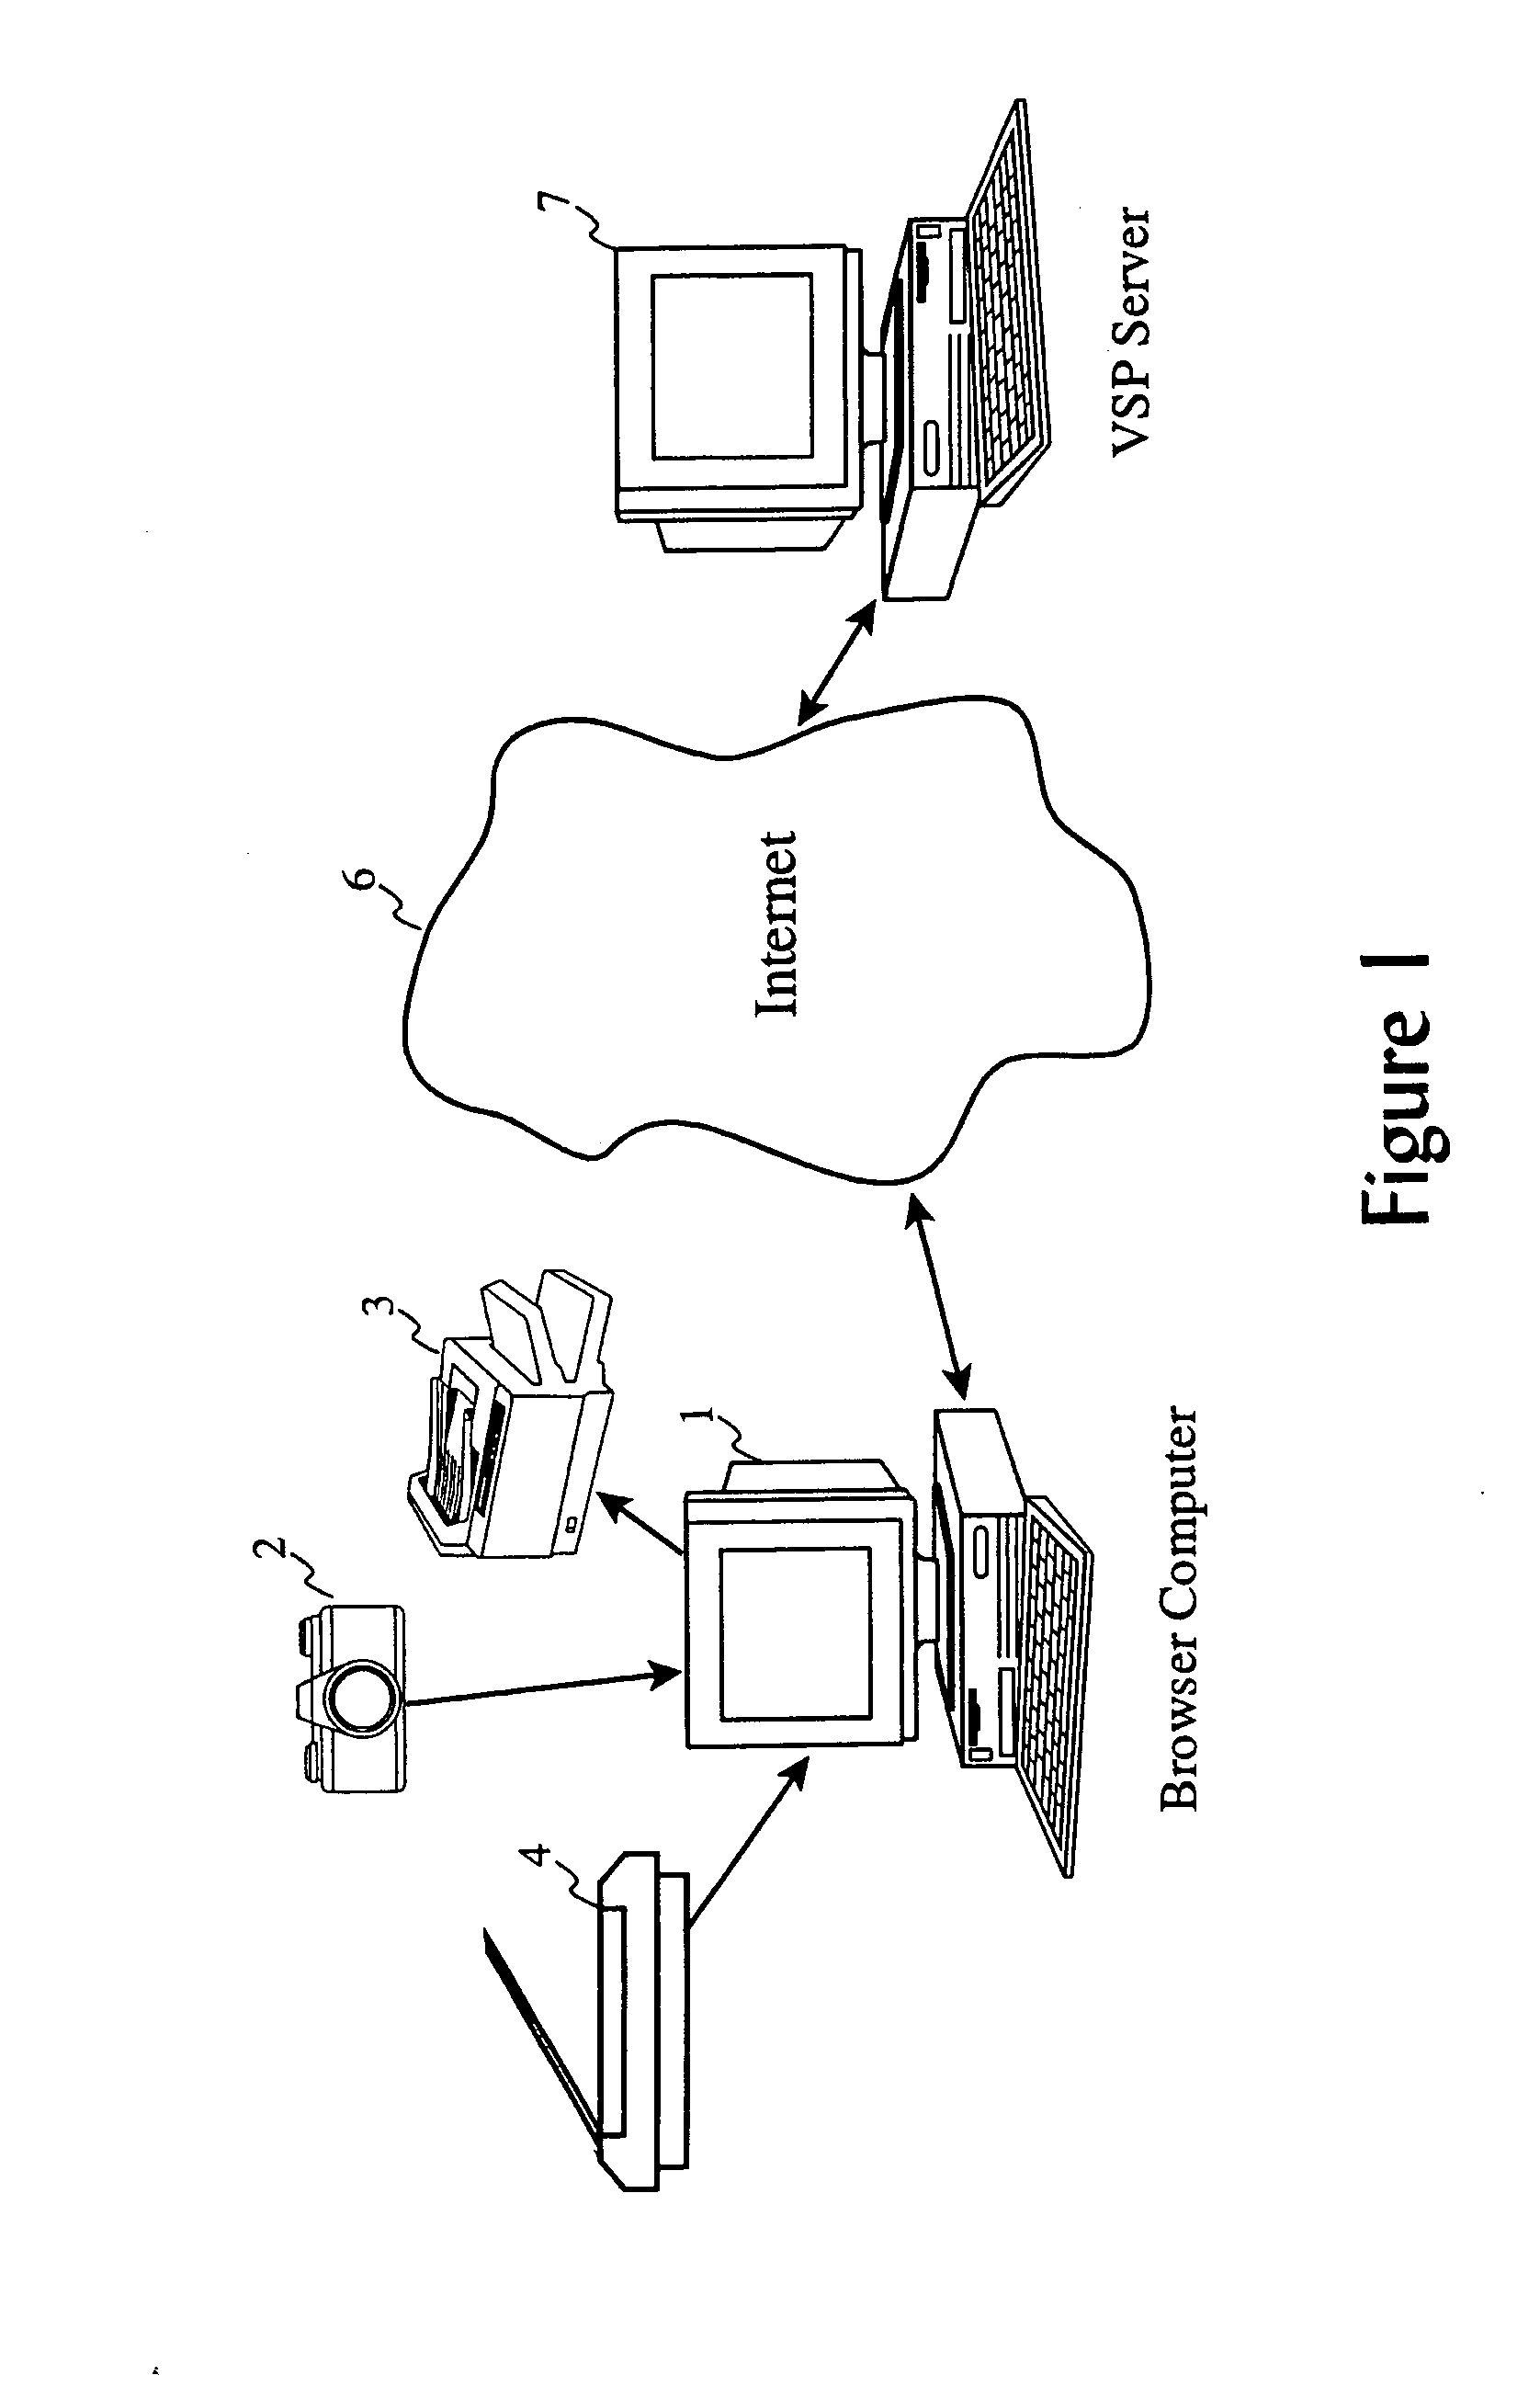 System and method for assessment of health risks and visualization of weight loss and muscle gain